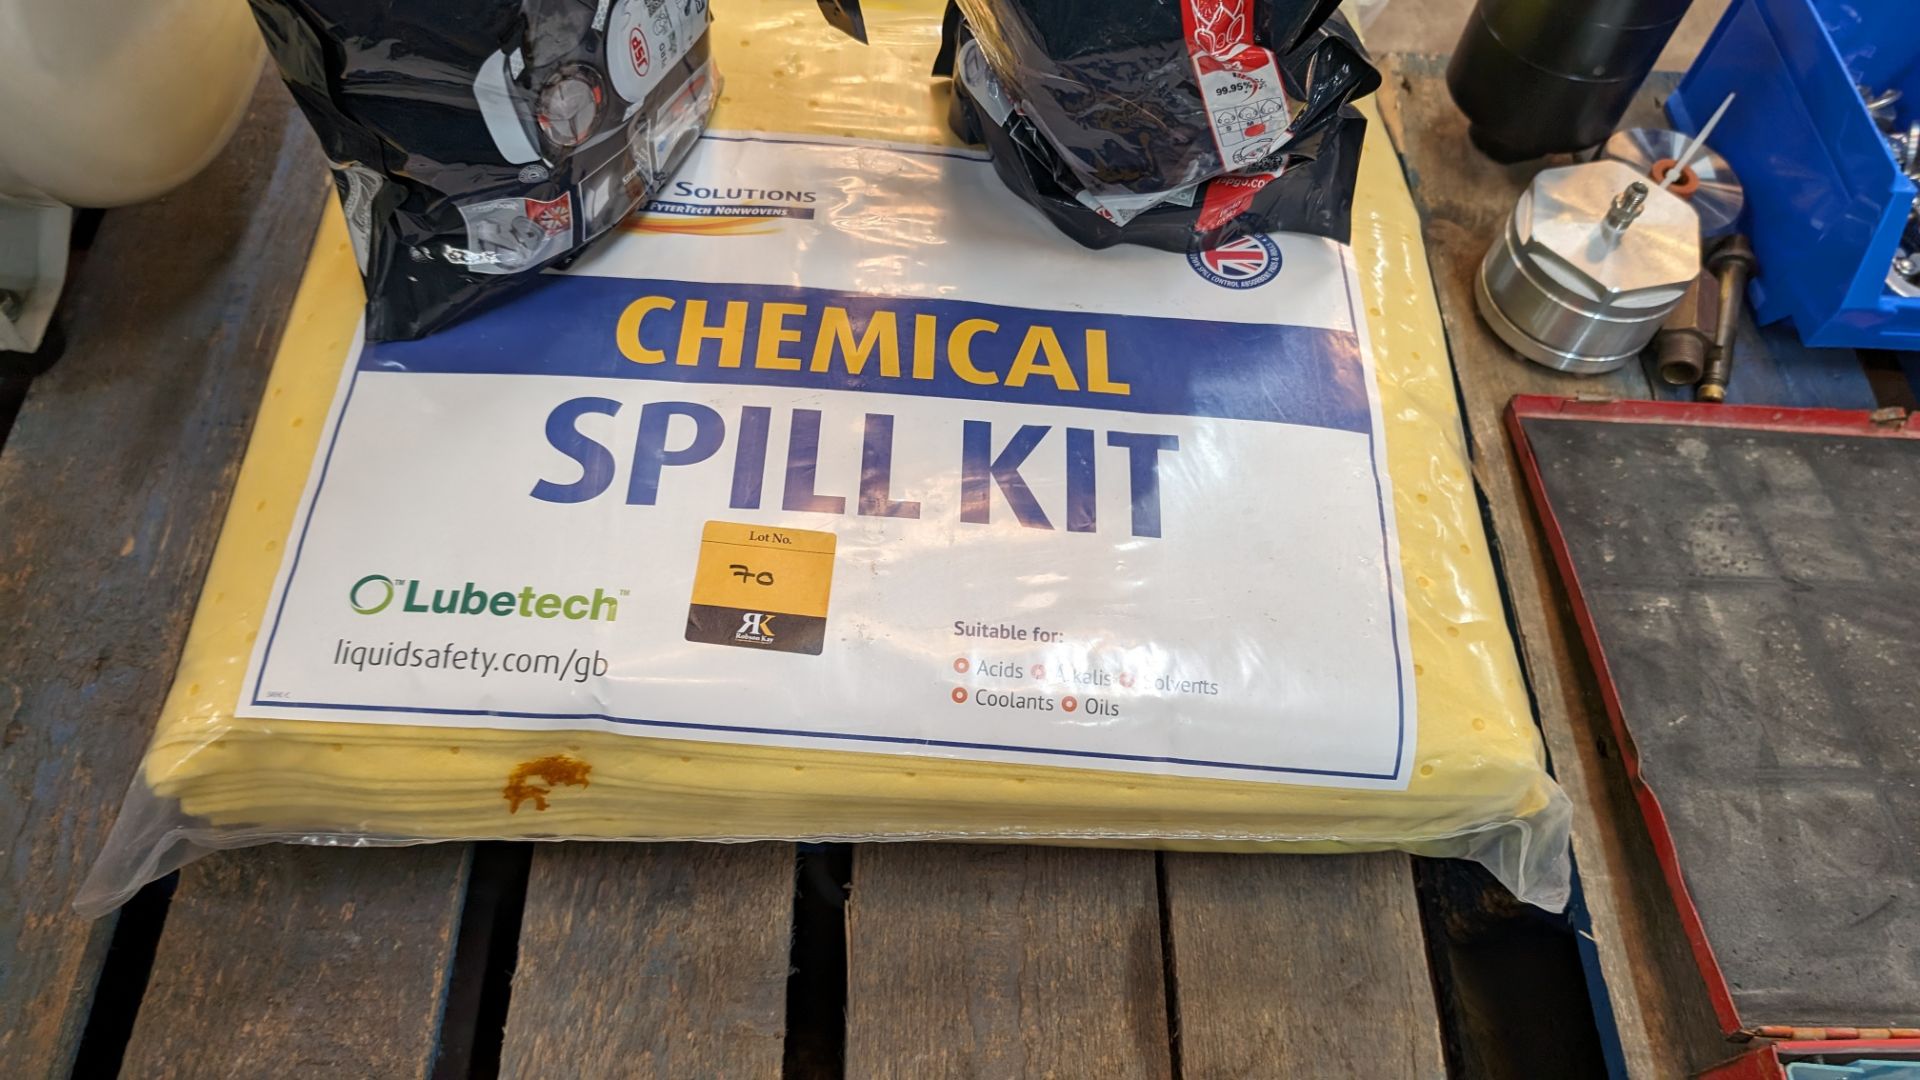 Chemical spill kit plus 2 off respirator devices - Image 4 of 8